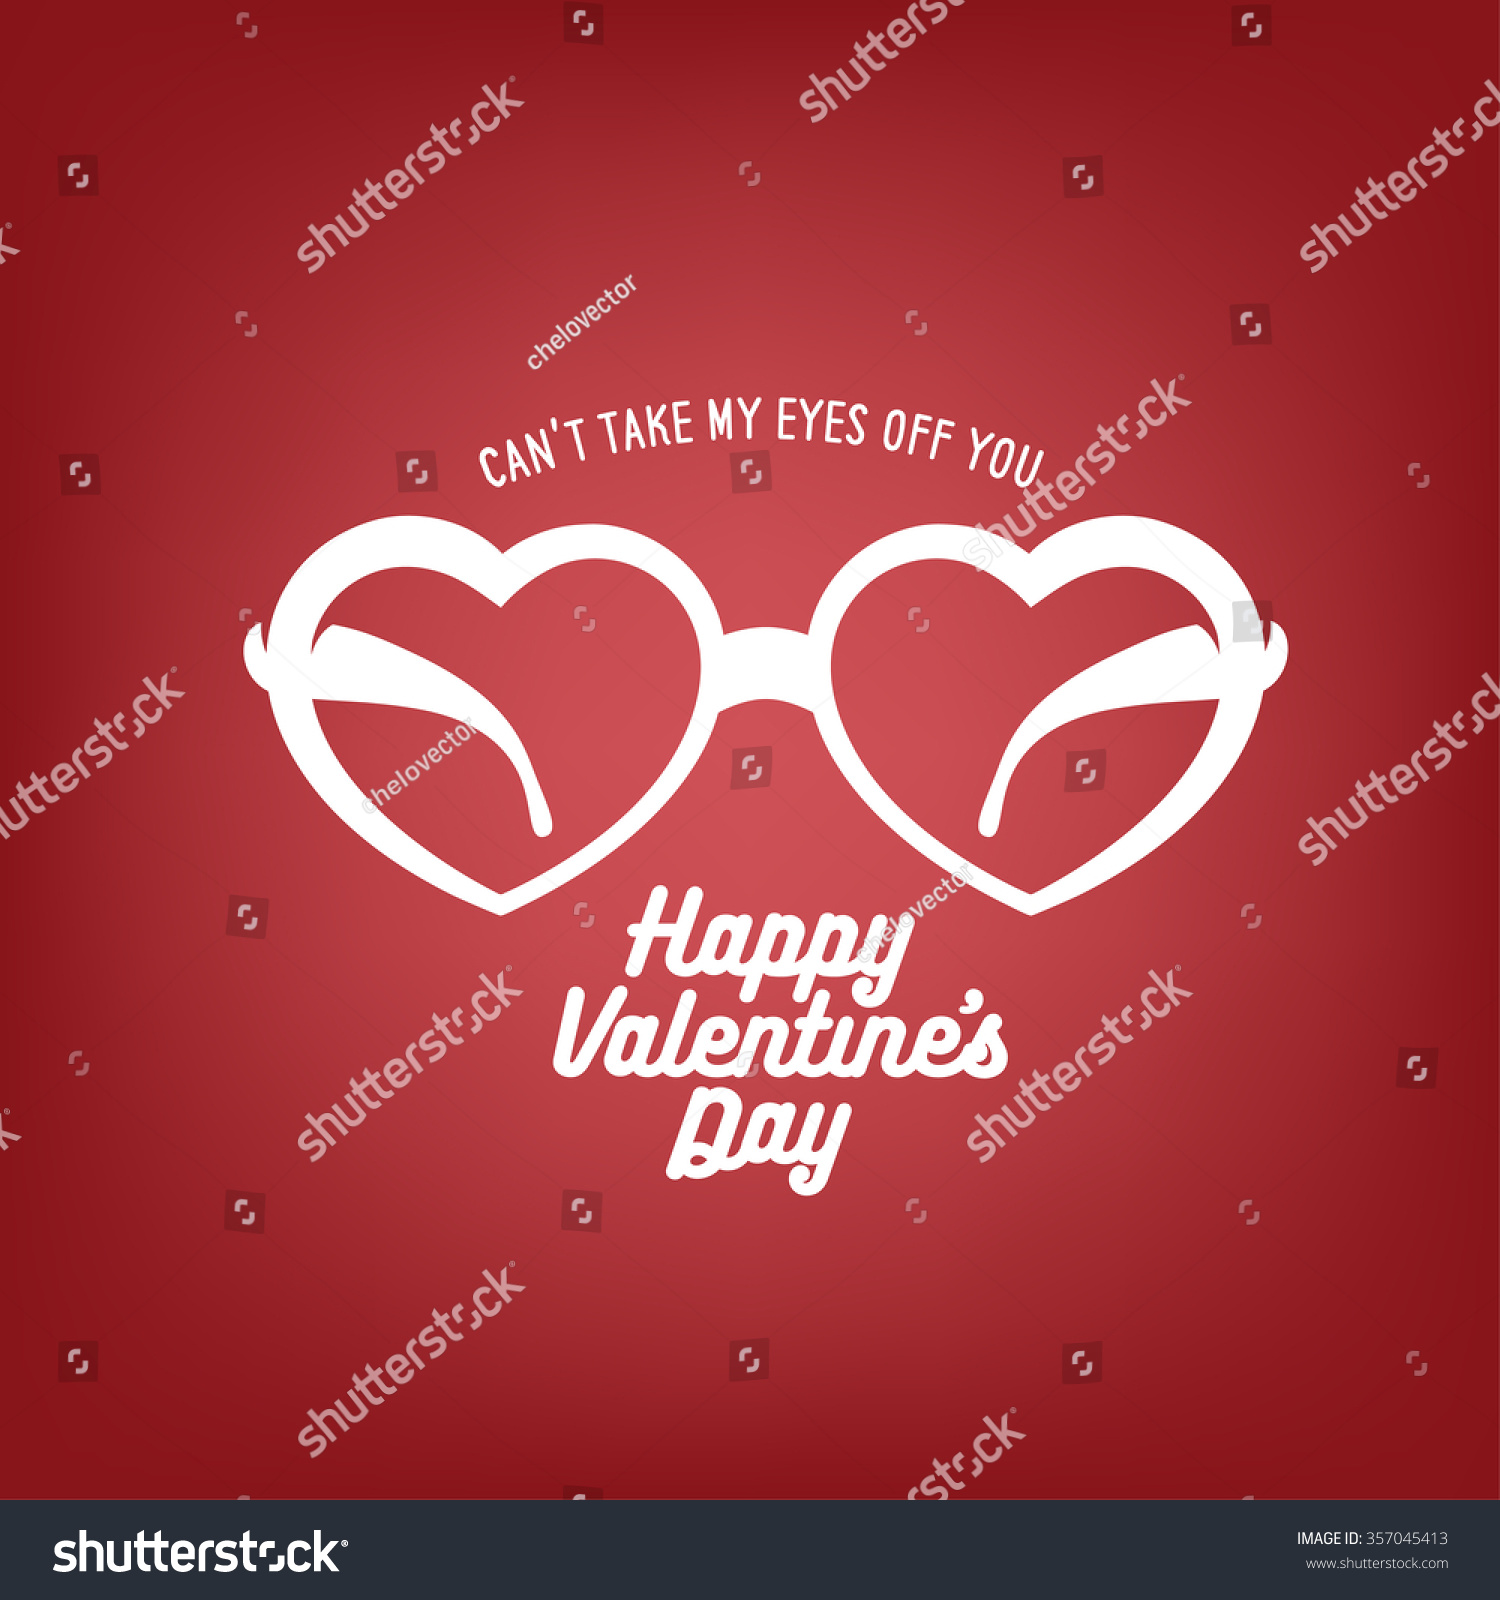 Valentine Day Card Heart Shaped Glasses Stock Vector Royalty Free